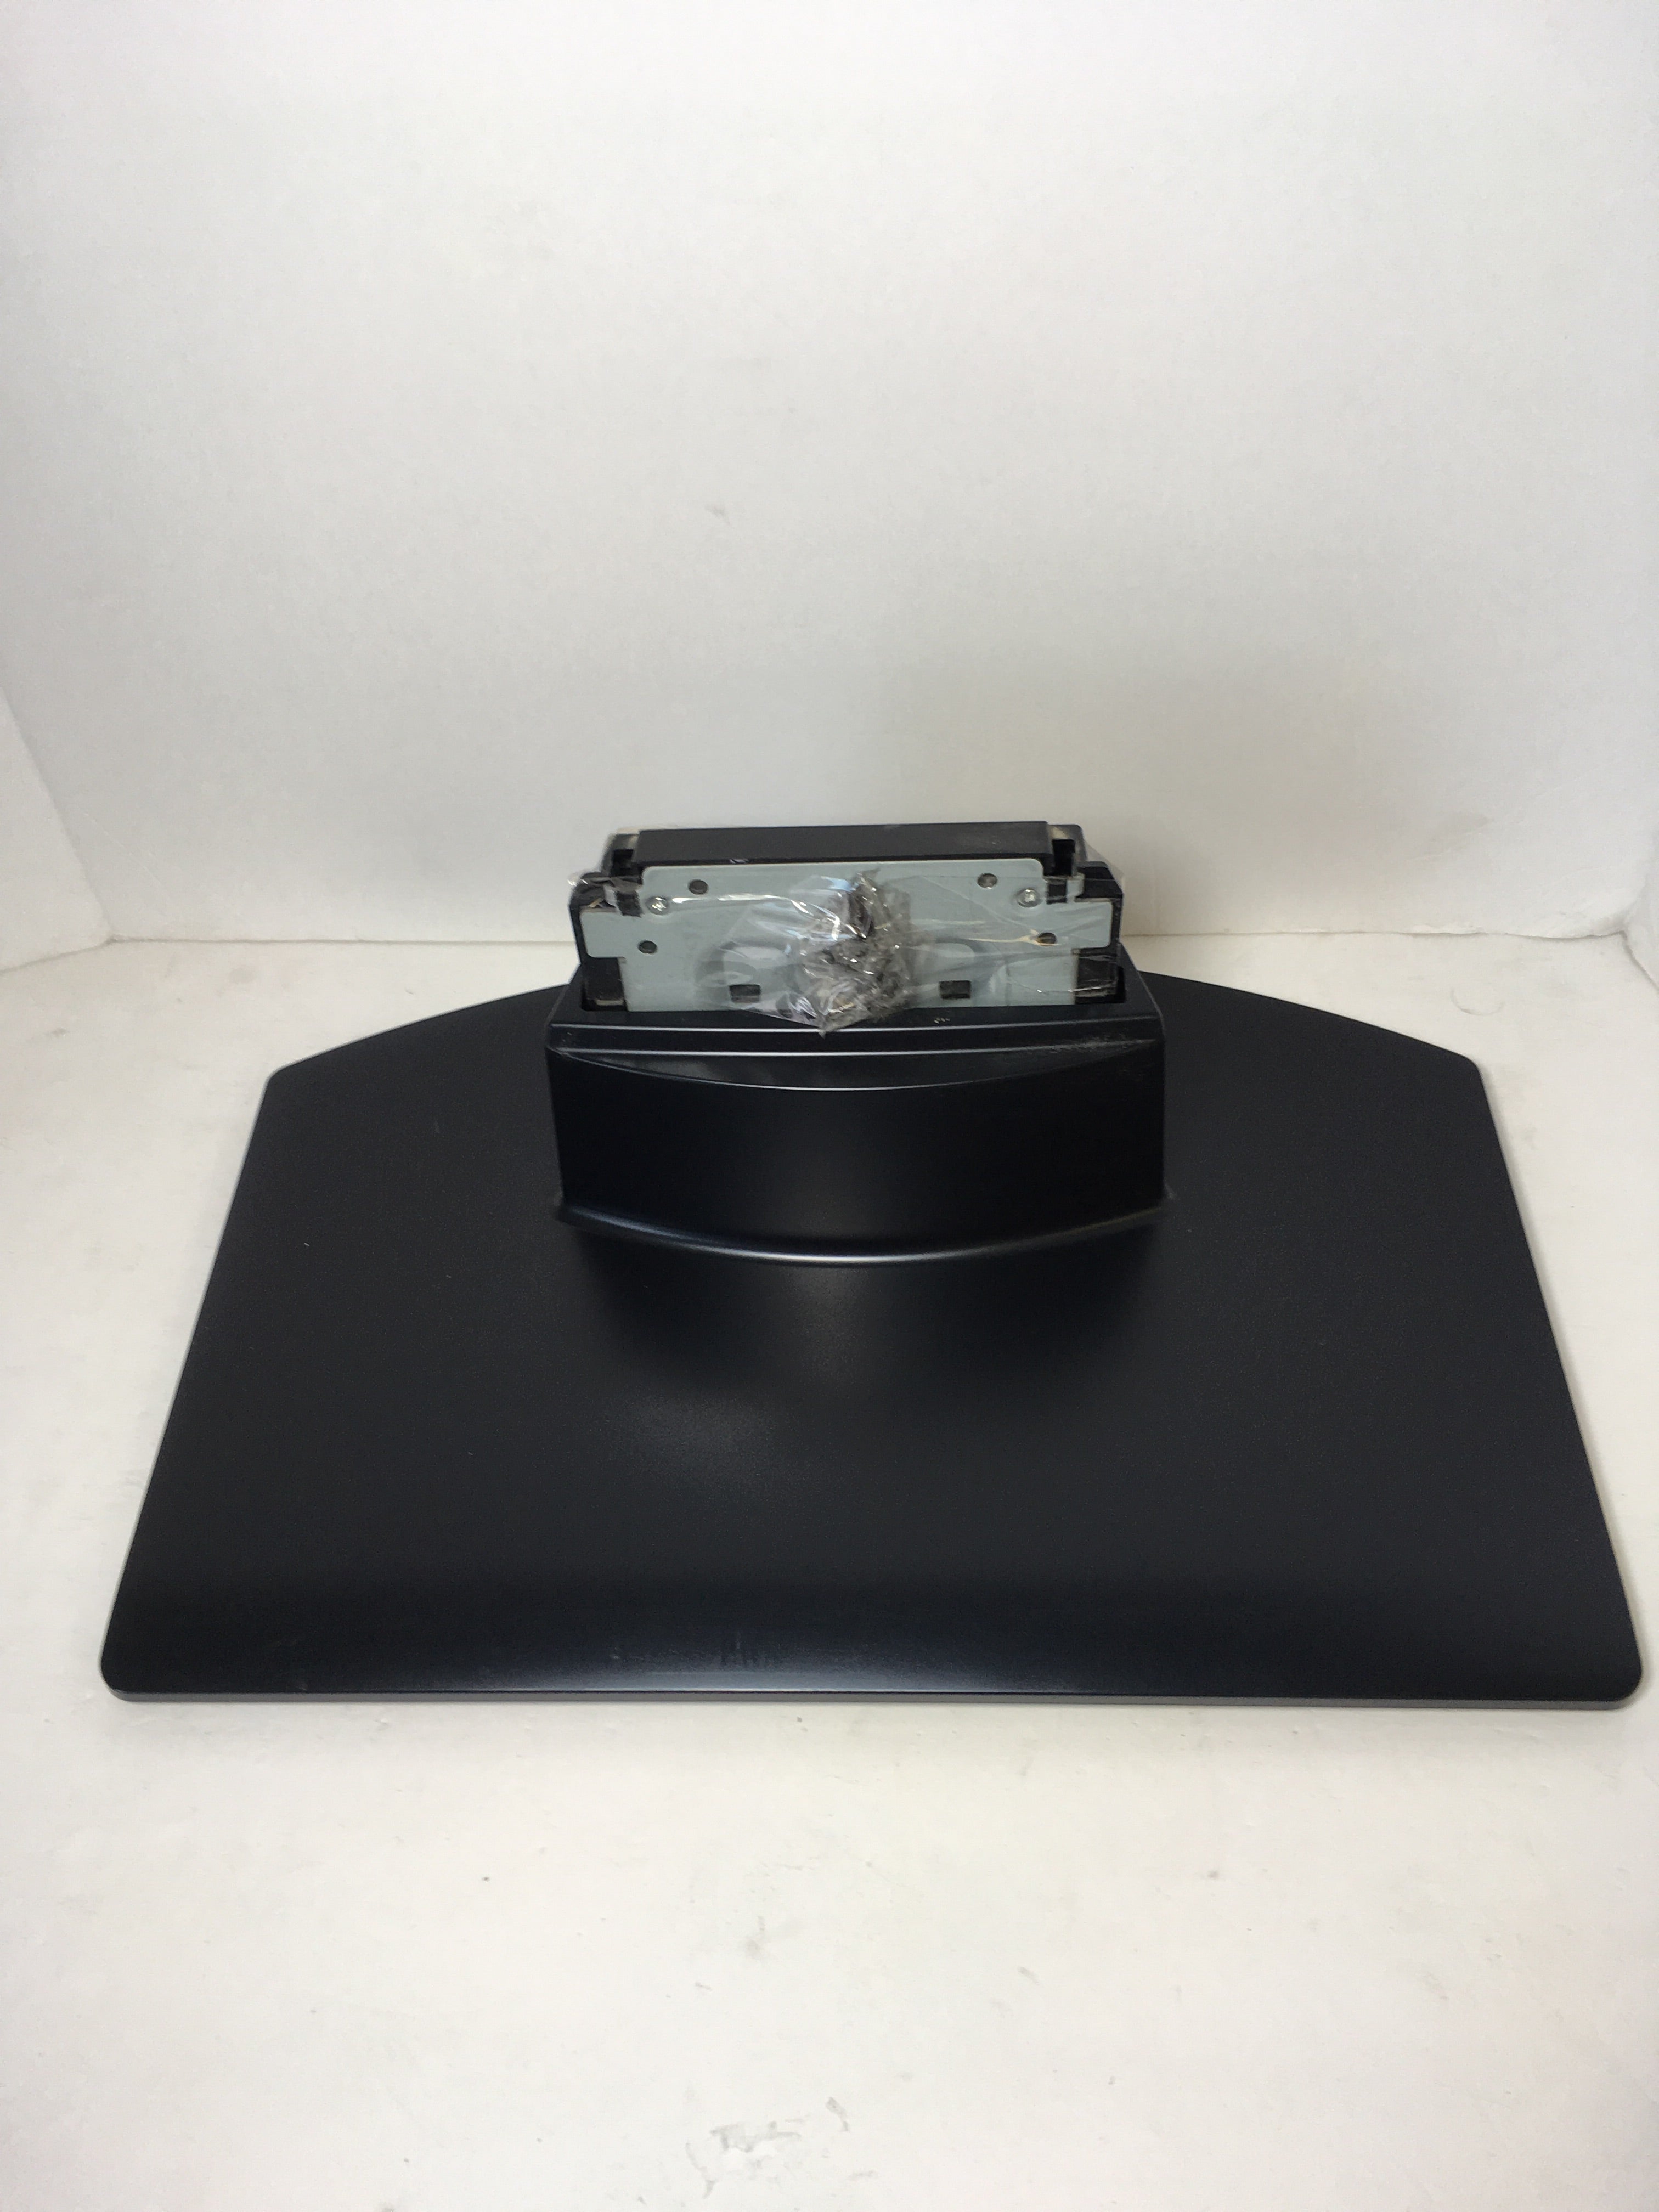 Sony KDL-40S4100 TV Stand/Base